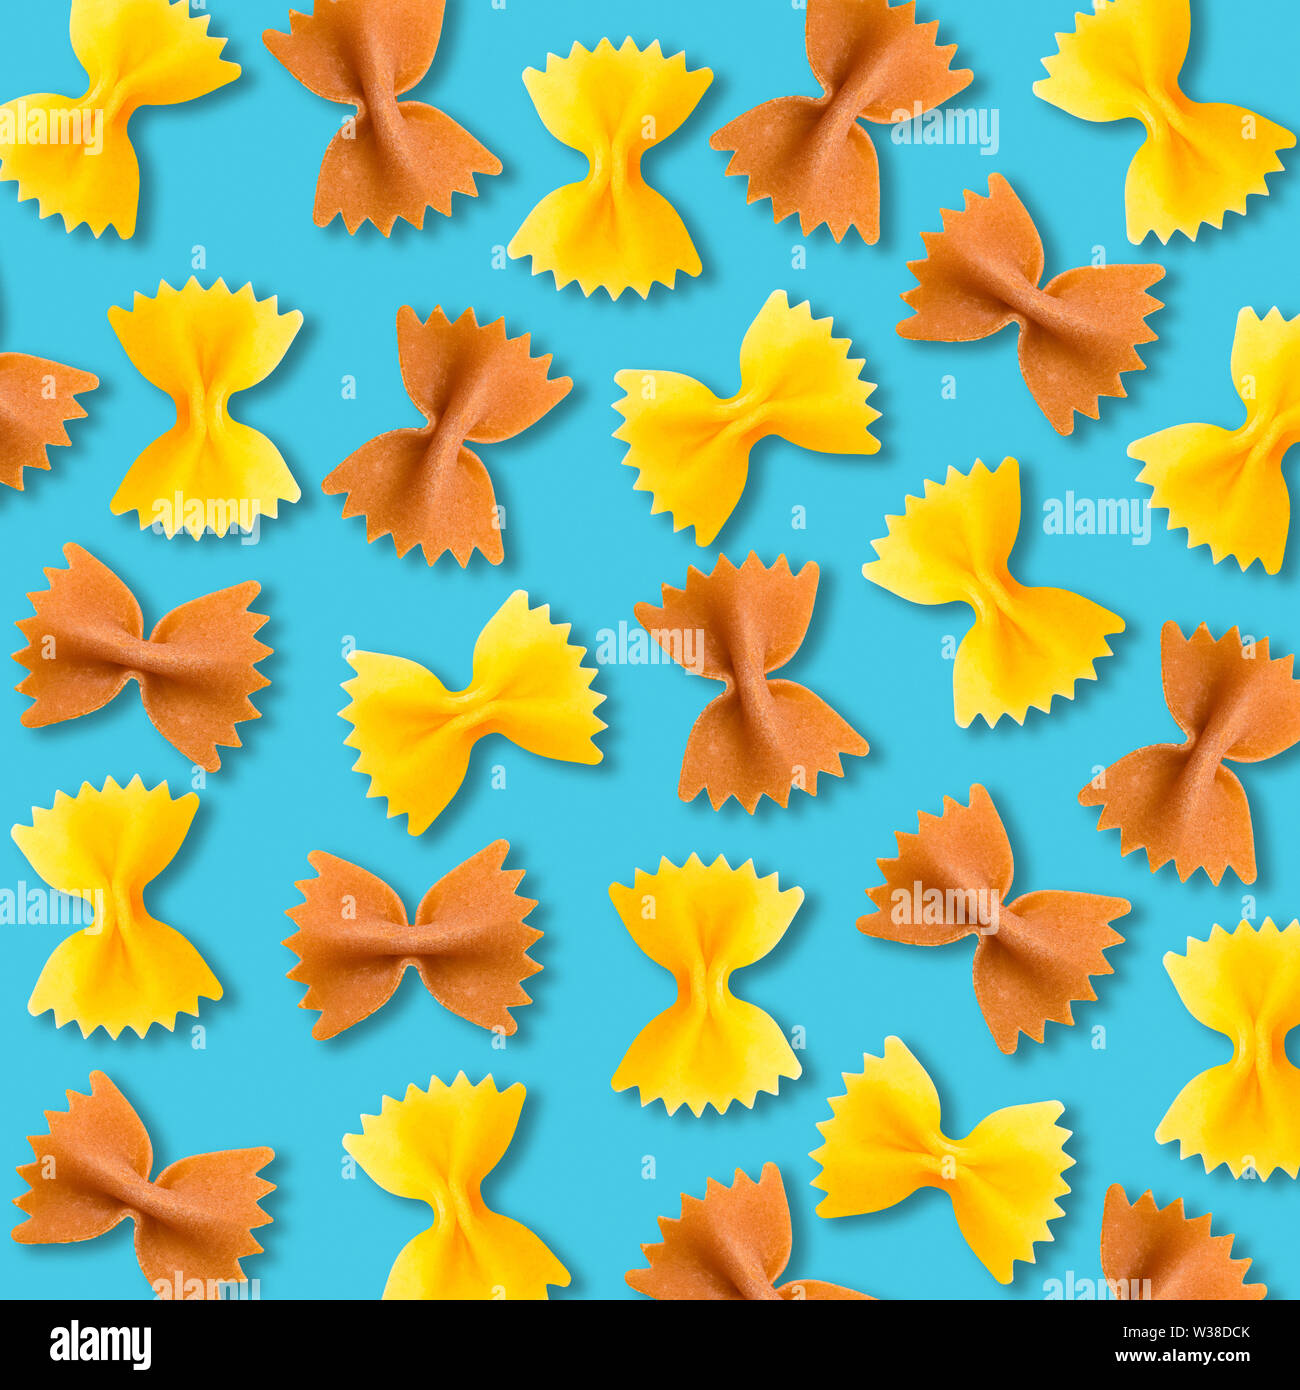 Yellow and brown farfalle pasta pattern on vibrant turquoise color background. Minimal flat lay geometric macaroni food texture Stock Photo